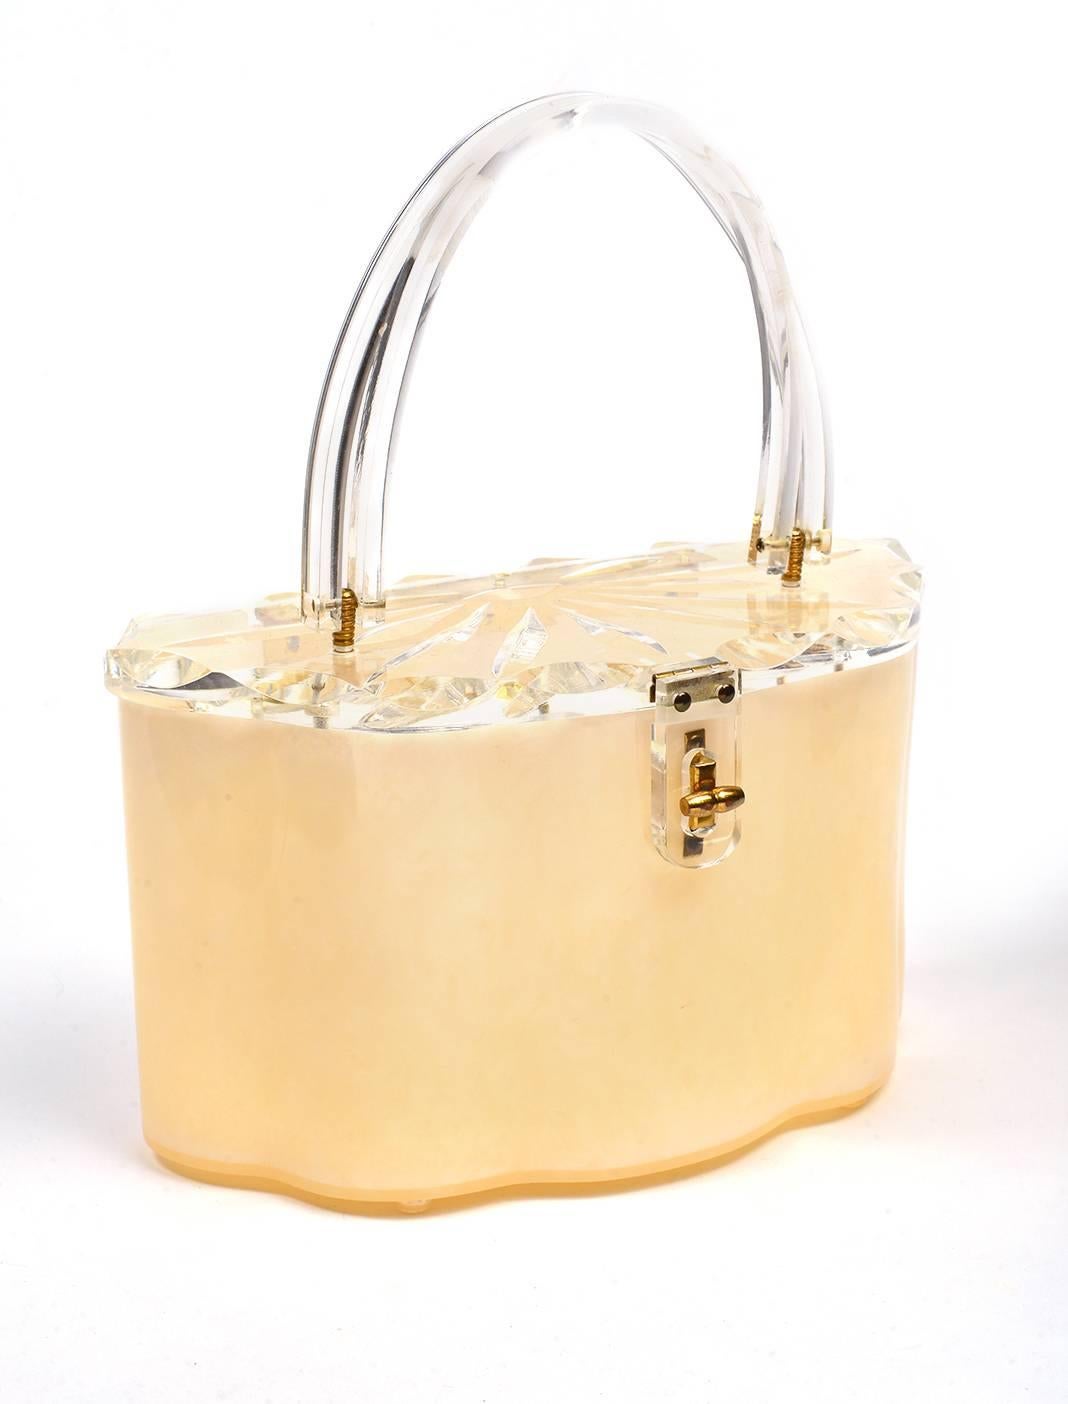 
Ravishing scalloped Lucite purse is something all on its own. Clear lid with carving's of half of a flower with the center and nine petals. The edge is also carved with a leaf like pattern which continues around the lid. The handle is clear and